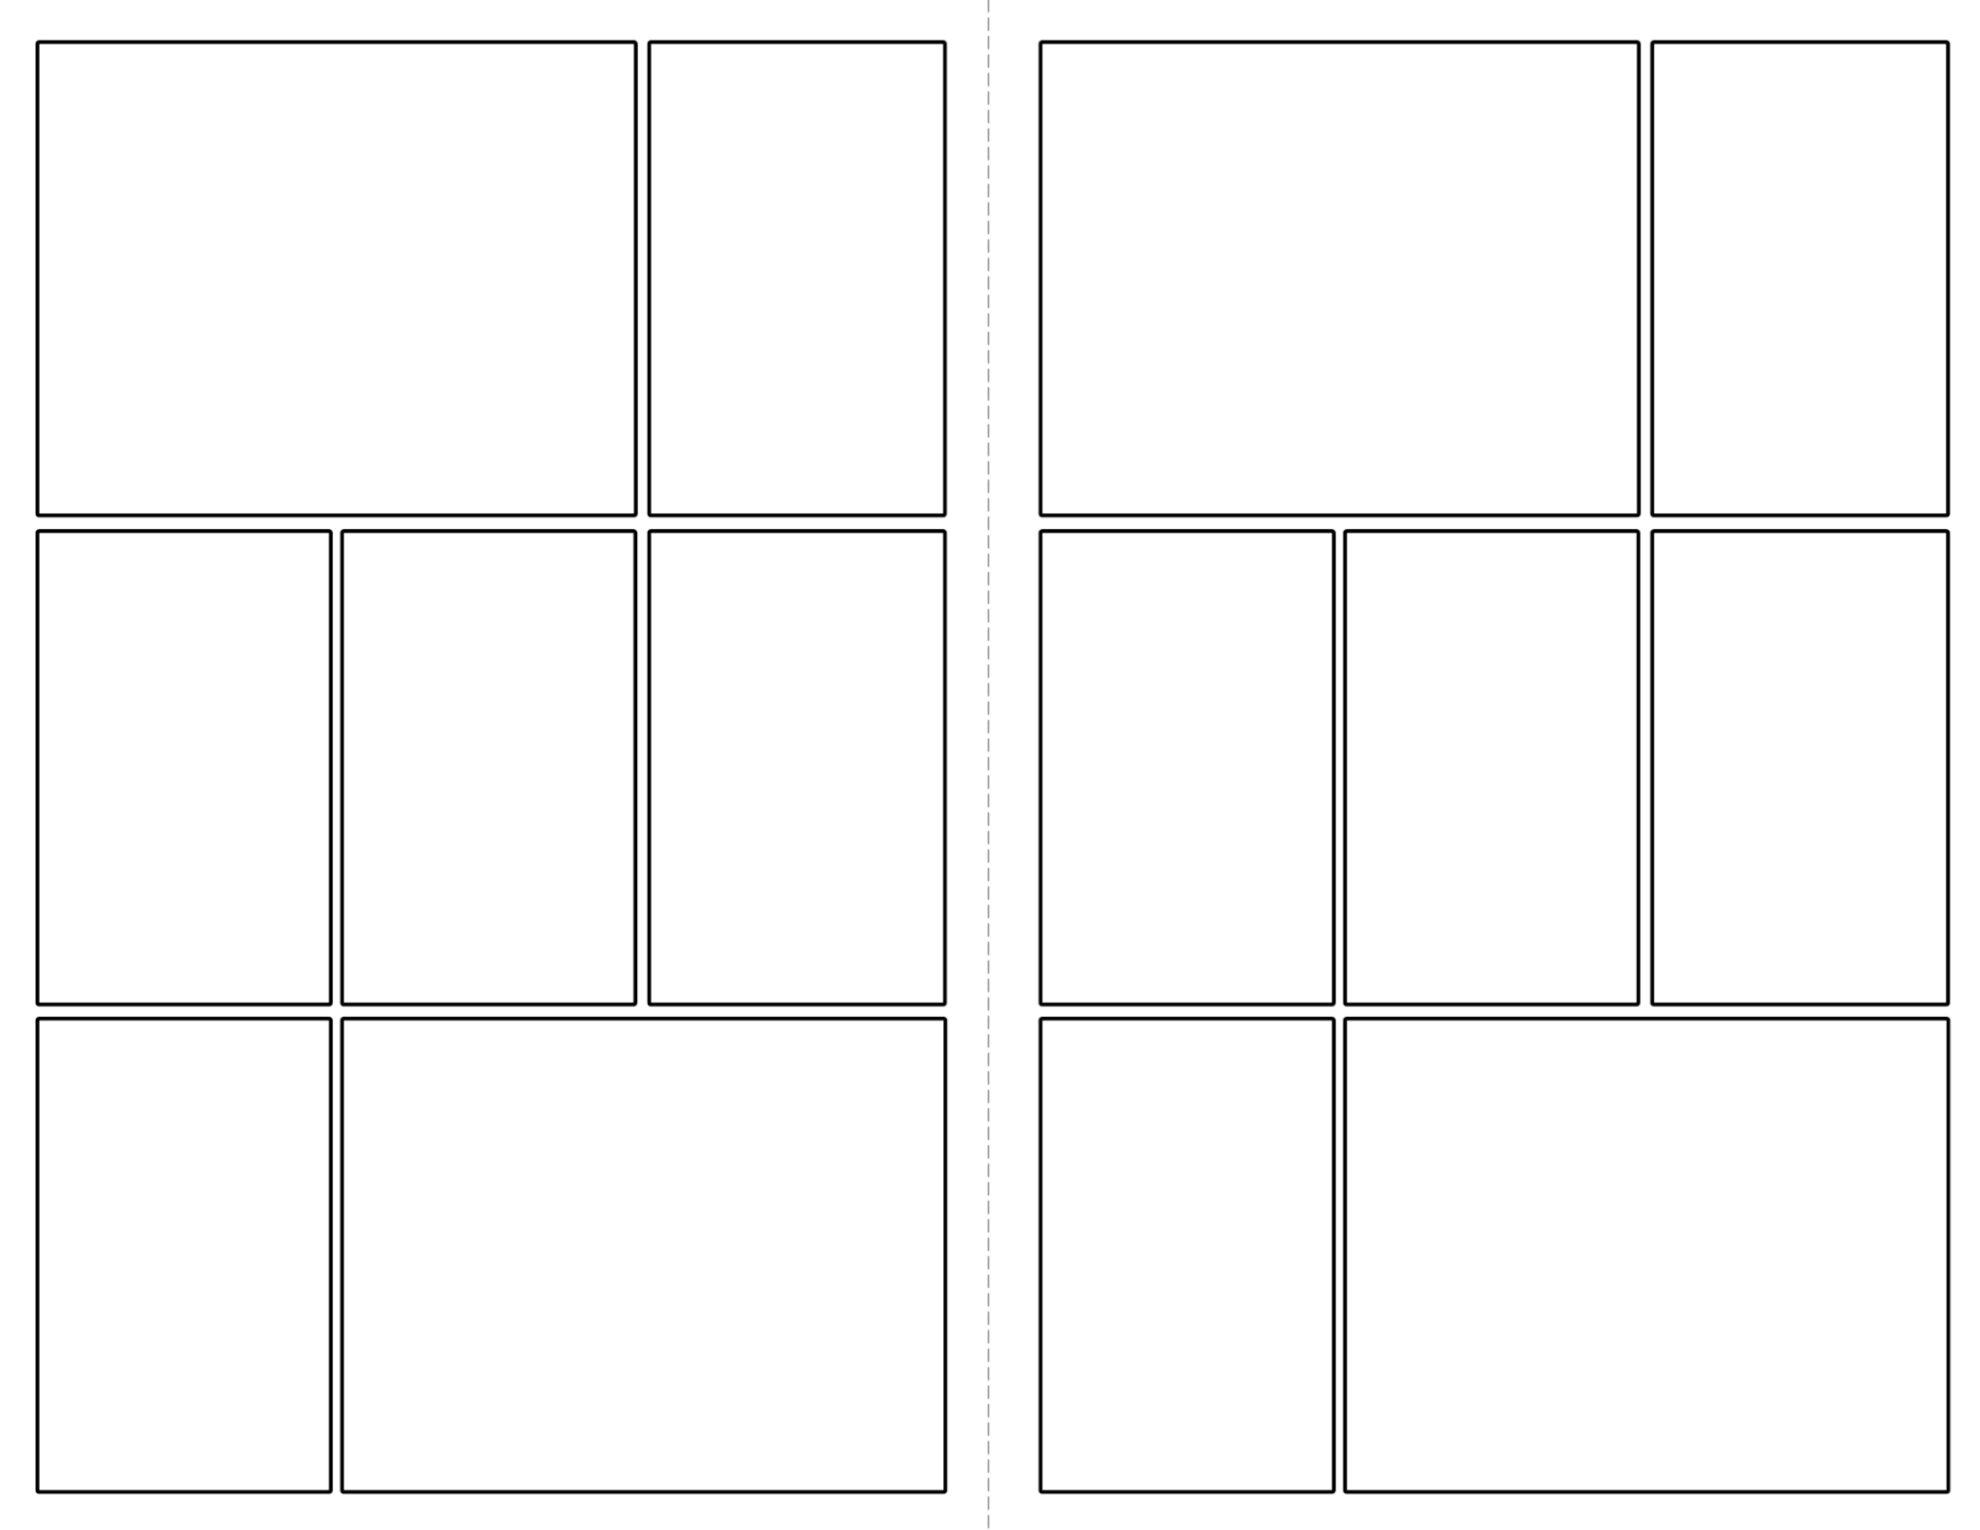 Free Printable Comic Book Blank Pages - Easy Peasy and Fun